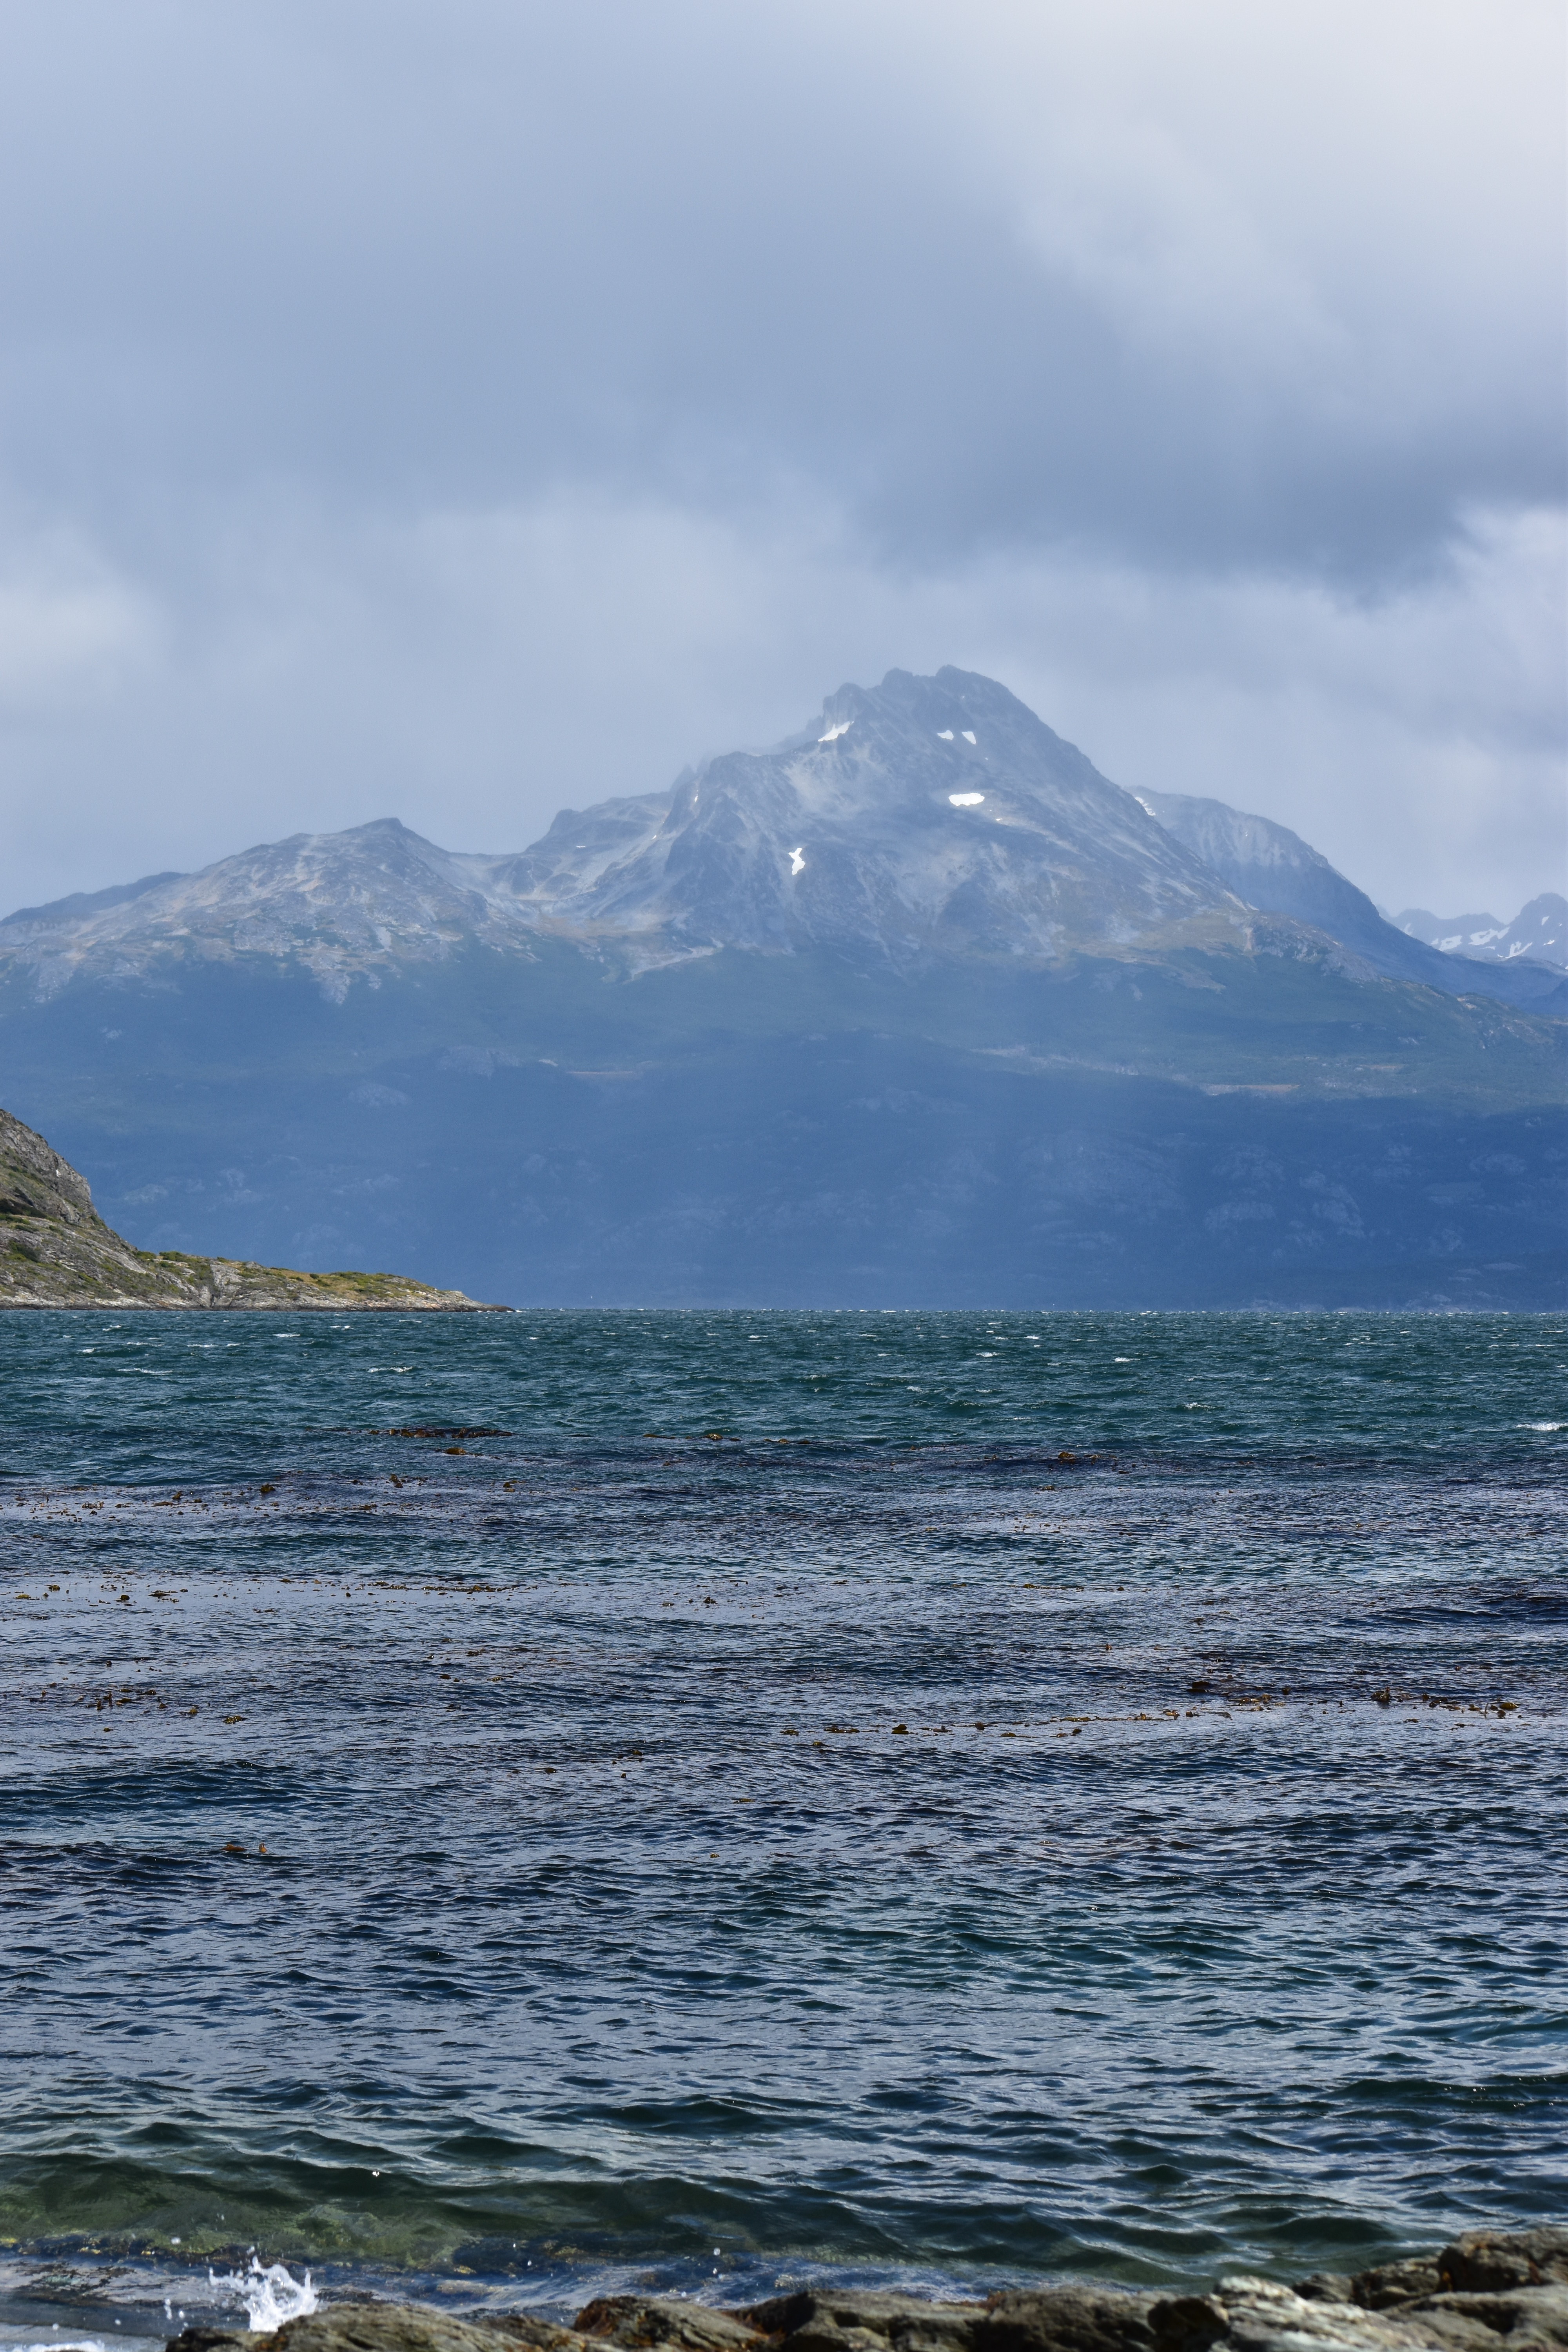 Chilean Mountains view from, Tierra del Fuego National Park, Argentina Feb. '20